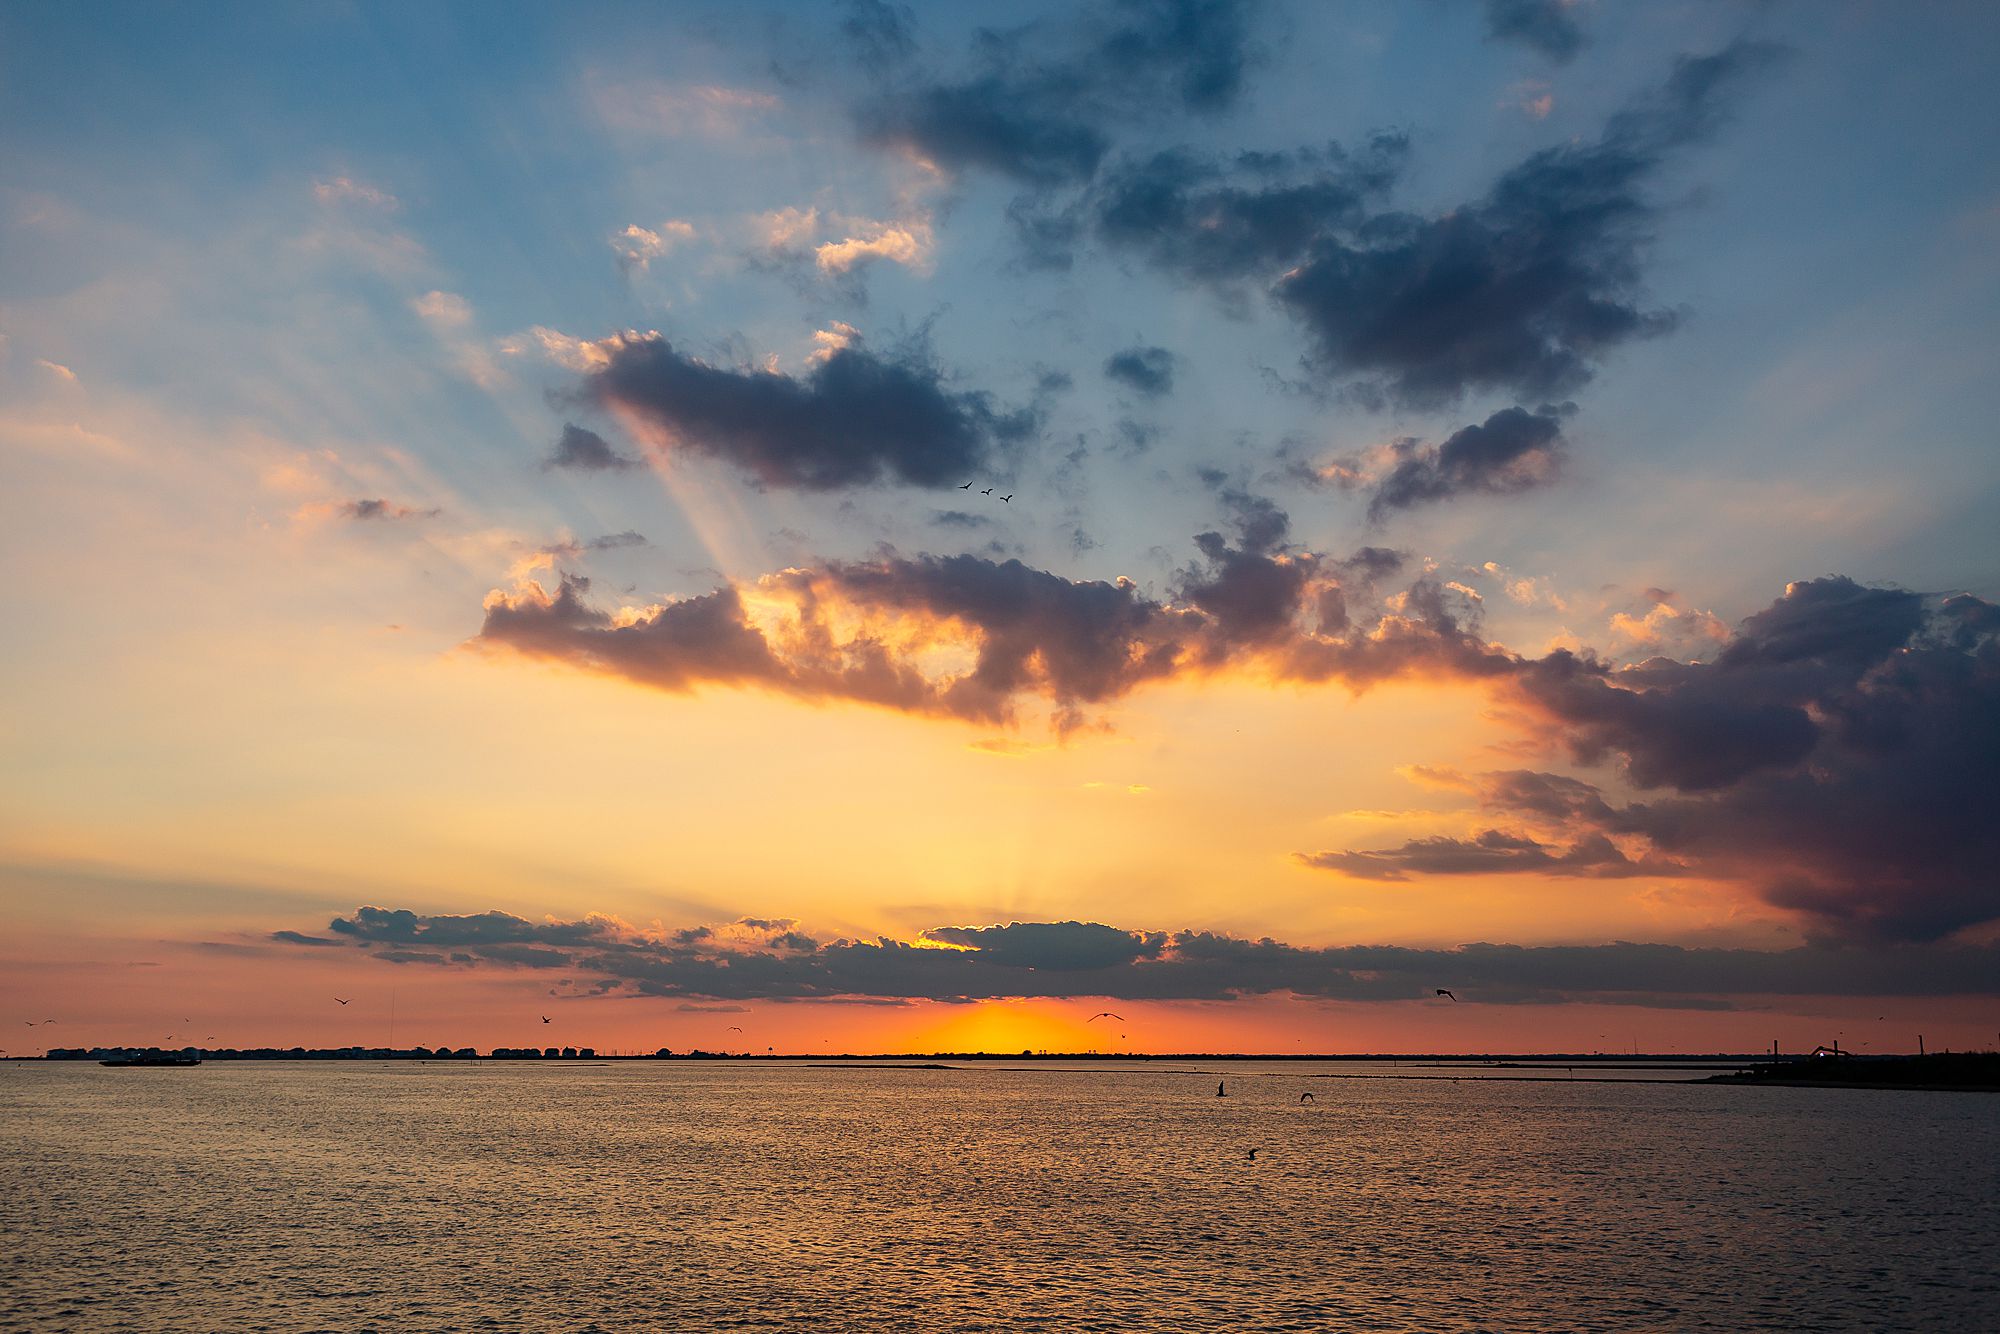 The sun sets behind a cloud in Galveston's West Bay.